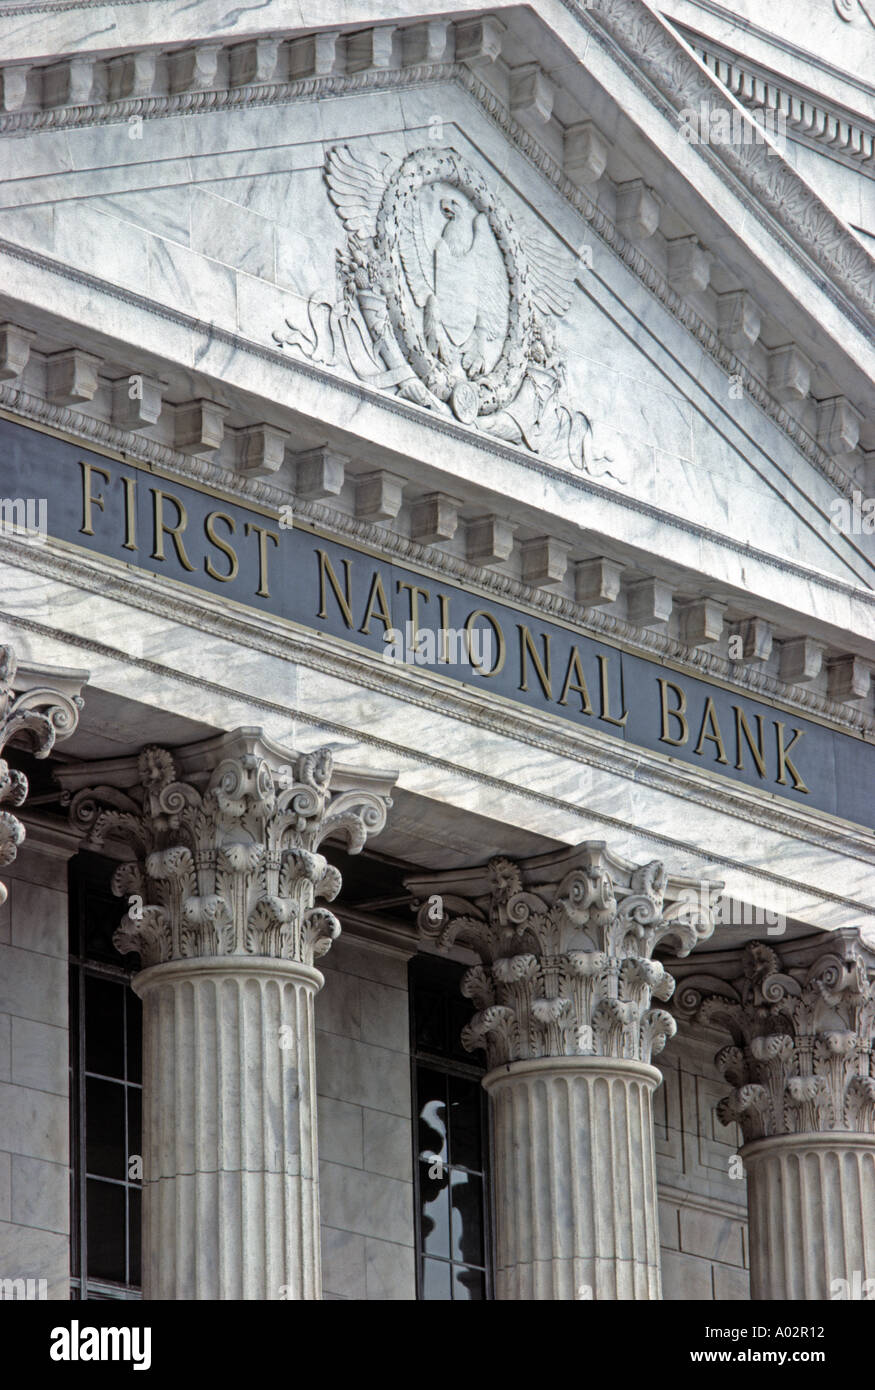 First national bank Greek revival architecture with decorative marble columns Stock Photo